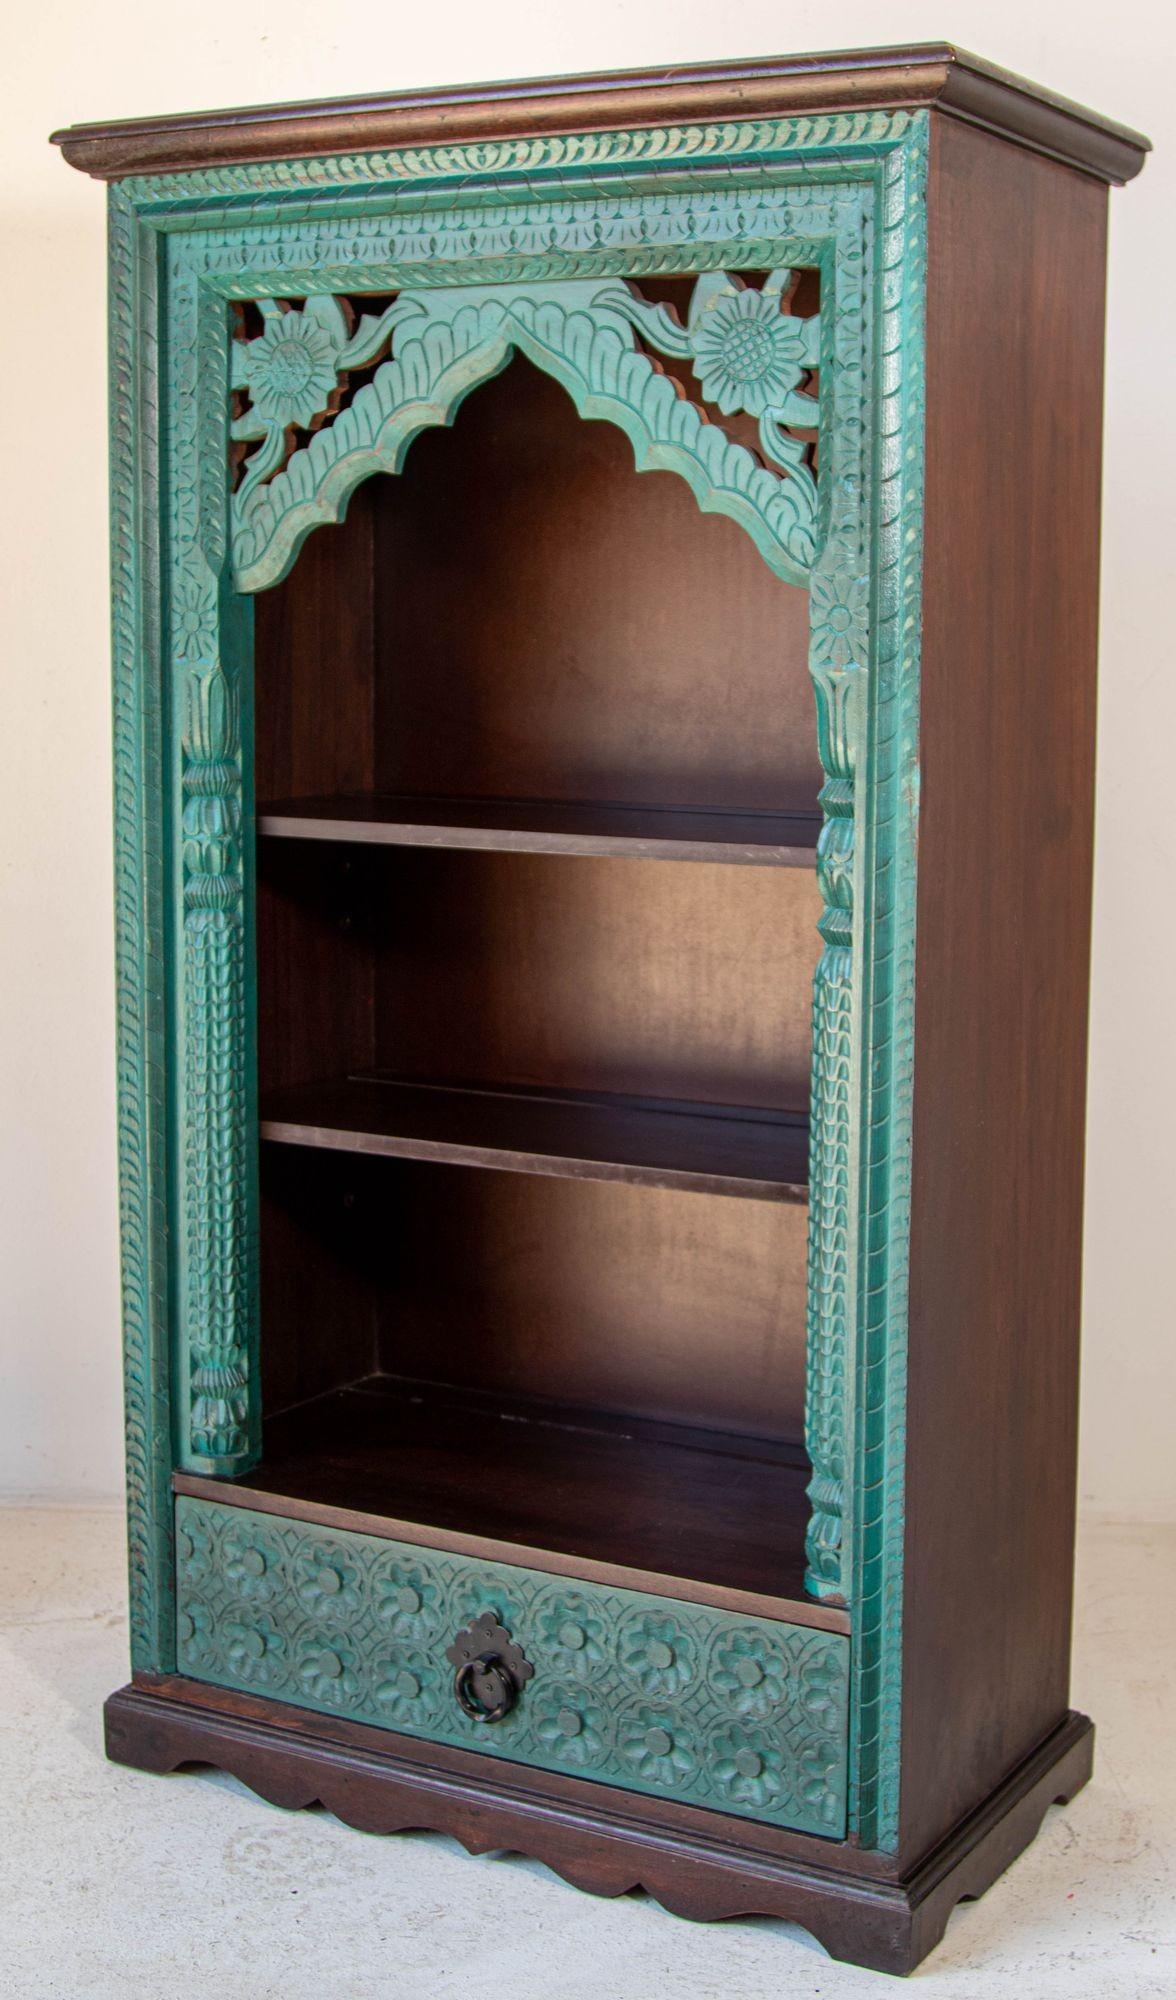 Vintage Hand-Carved Arch Bookshelf Wooden Cabinet in Rustic Blue antique distressed look.
Painted blue arch bookshelf with distressed finish.
Traditional and authentic Indian wooden display cabinet hand-carved with distressed blue wood finish.
This